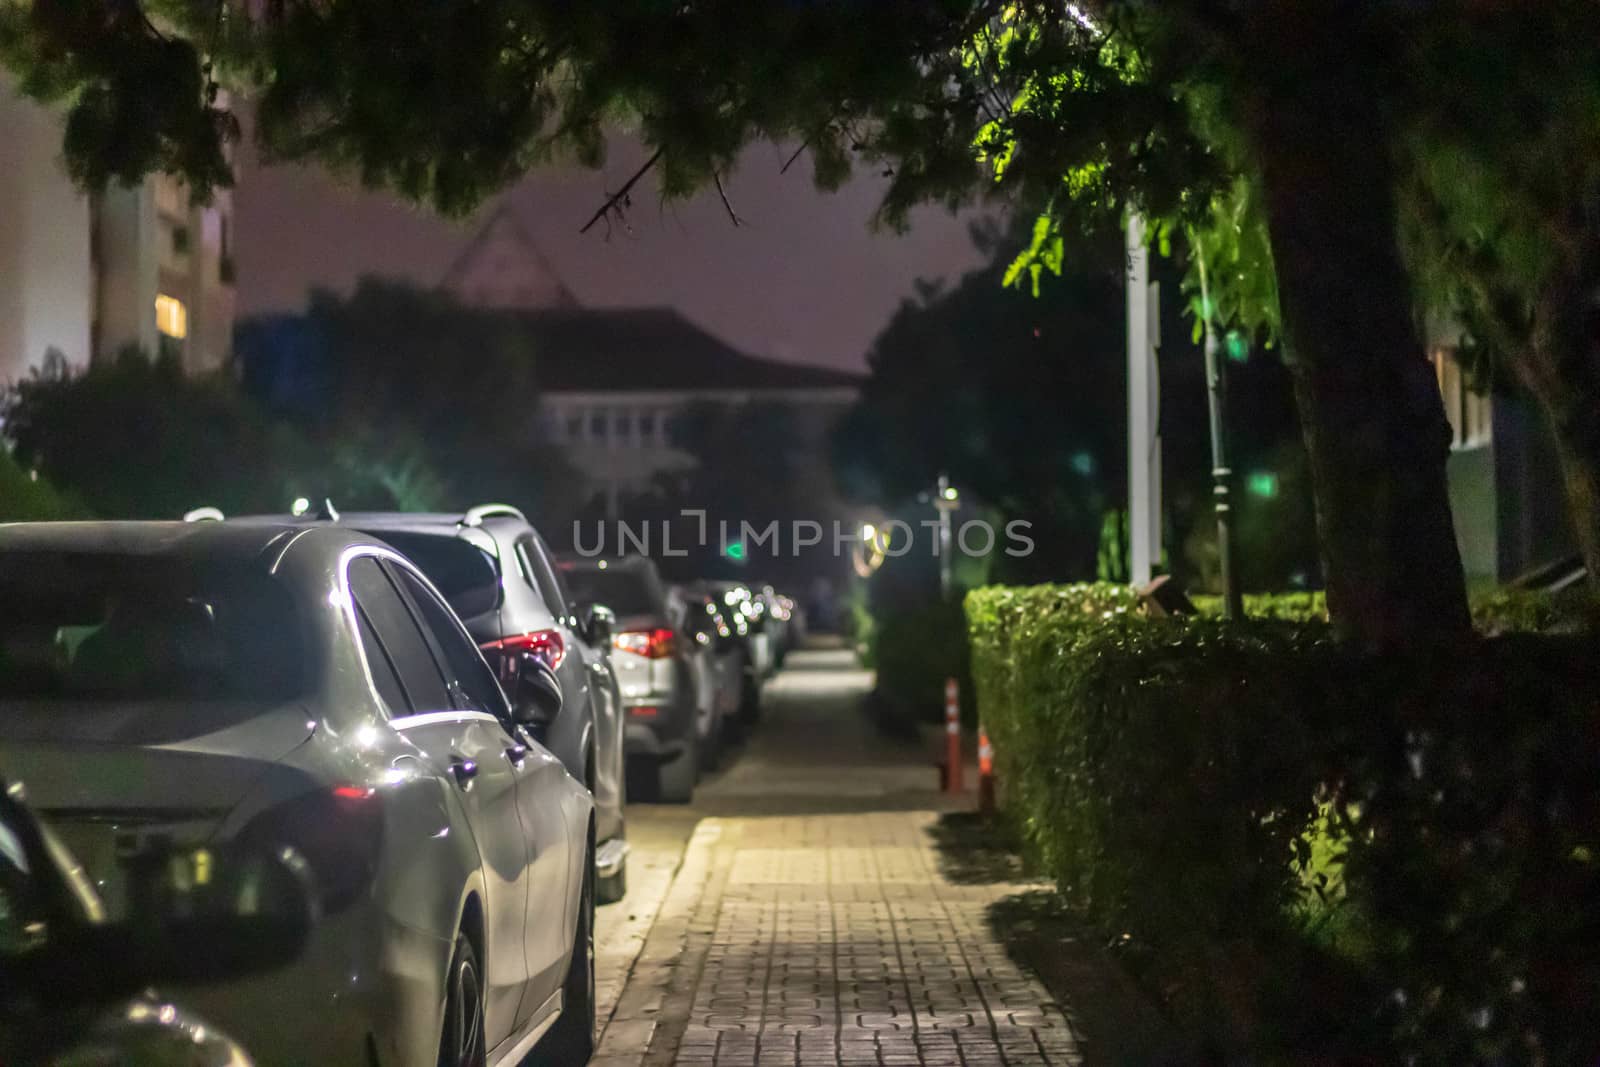 a nice looking narrow night shoot from sidewalk - there is many cars and street lights. photo has taken at izmir/turkey.